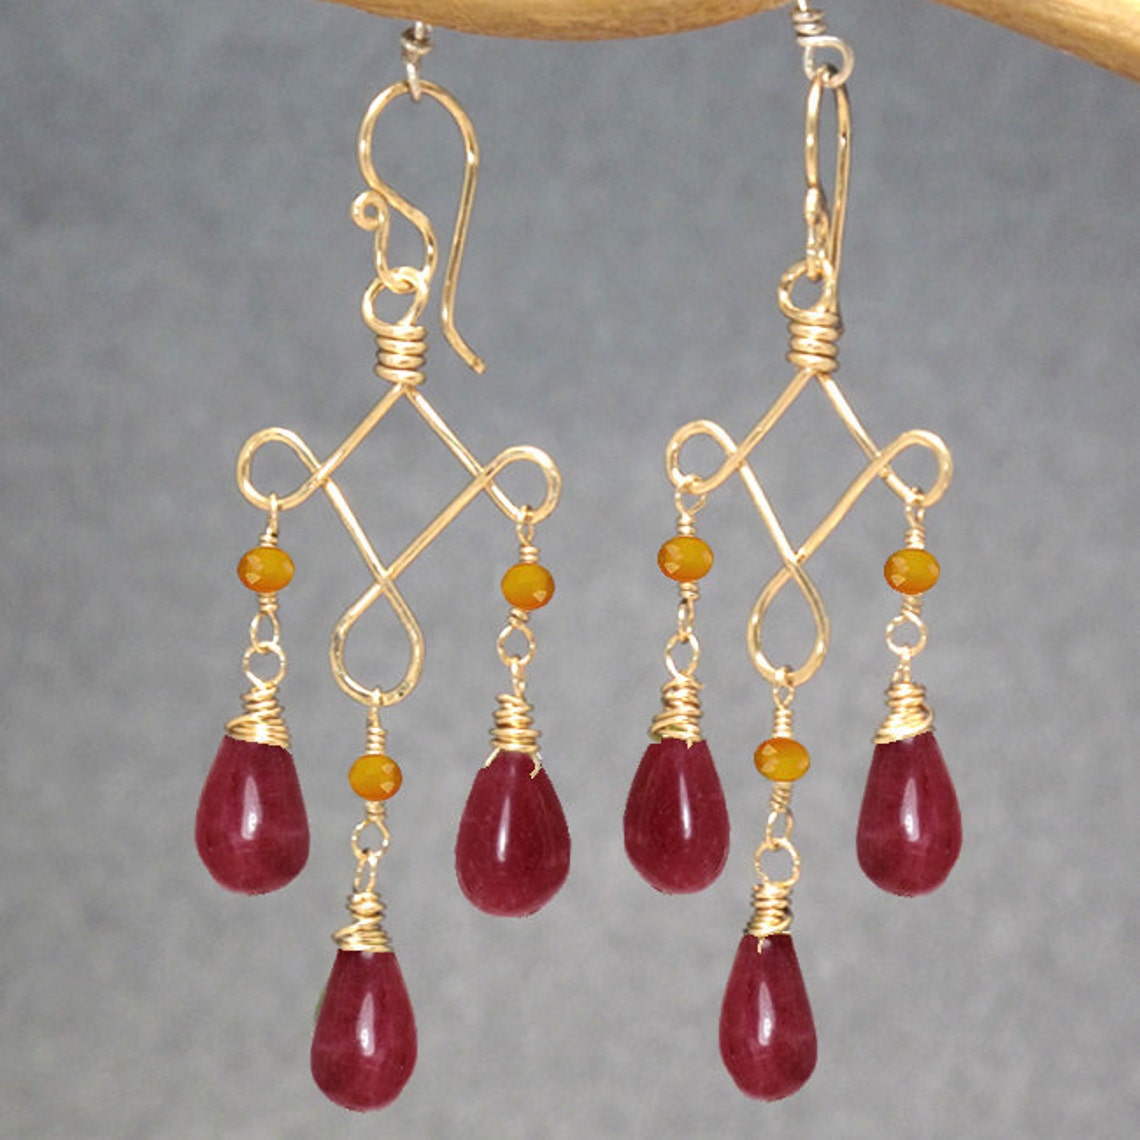 Carnelian and Ruby on Hammered Curled Earrings Gypsy 47 - Etsy